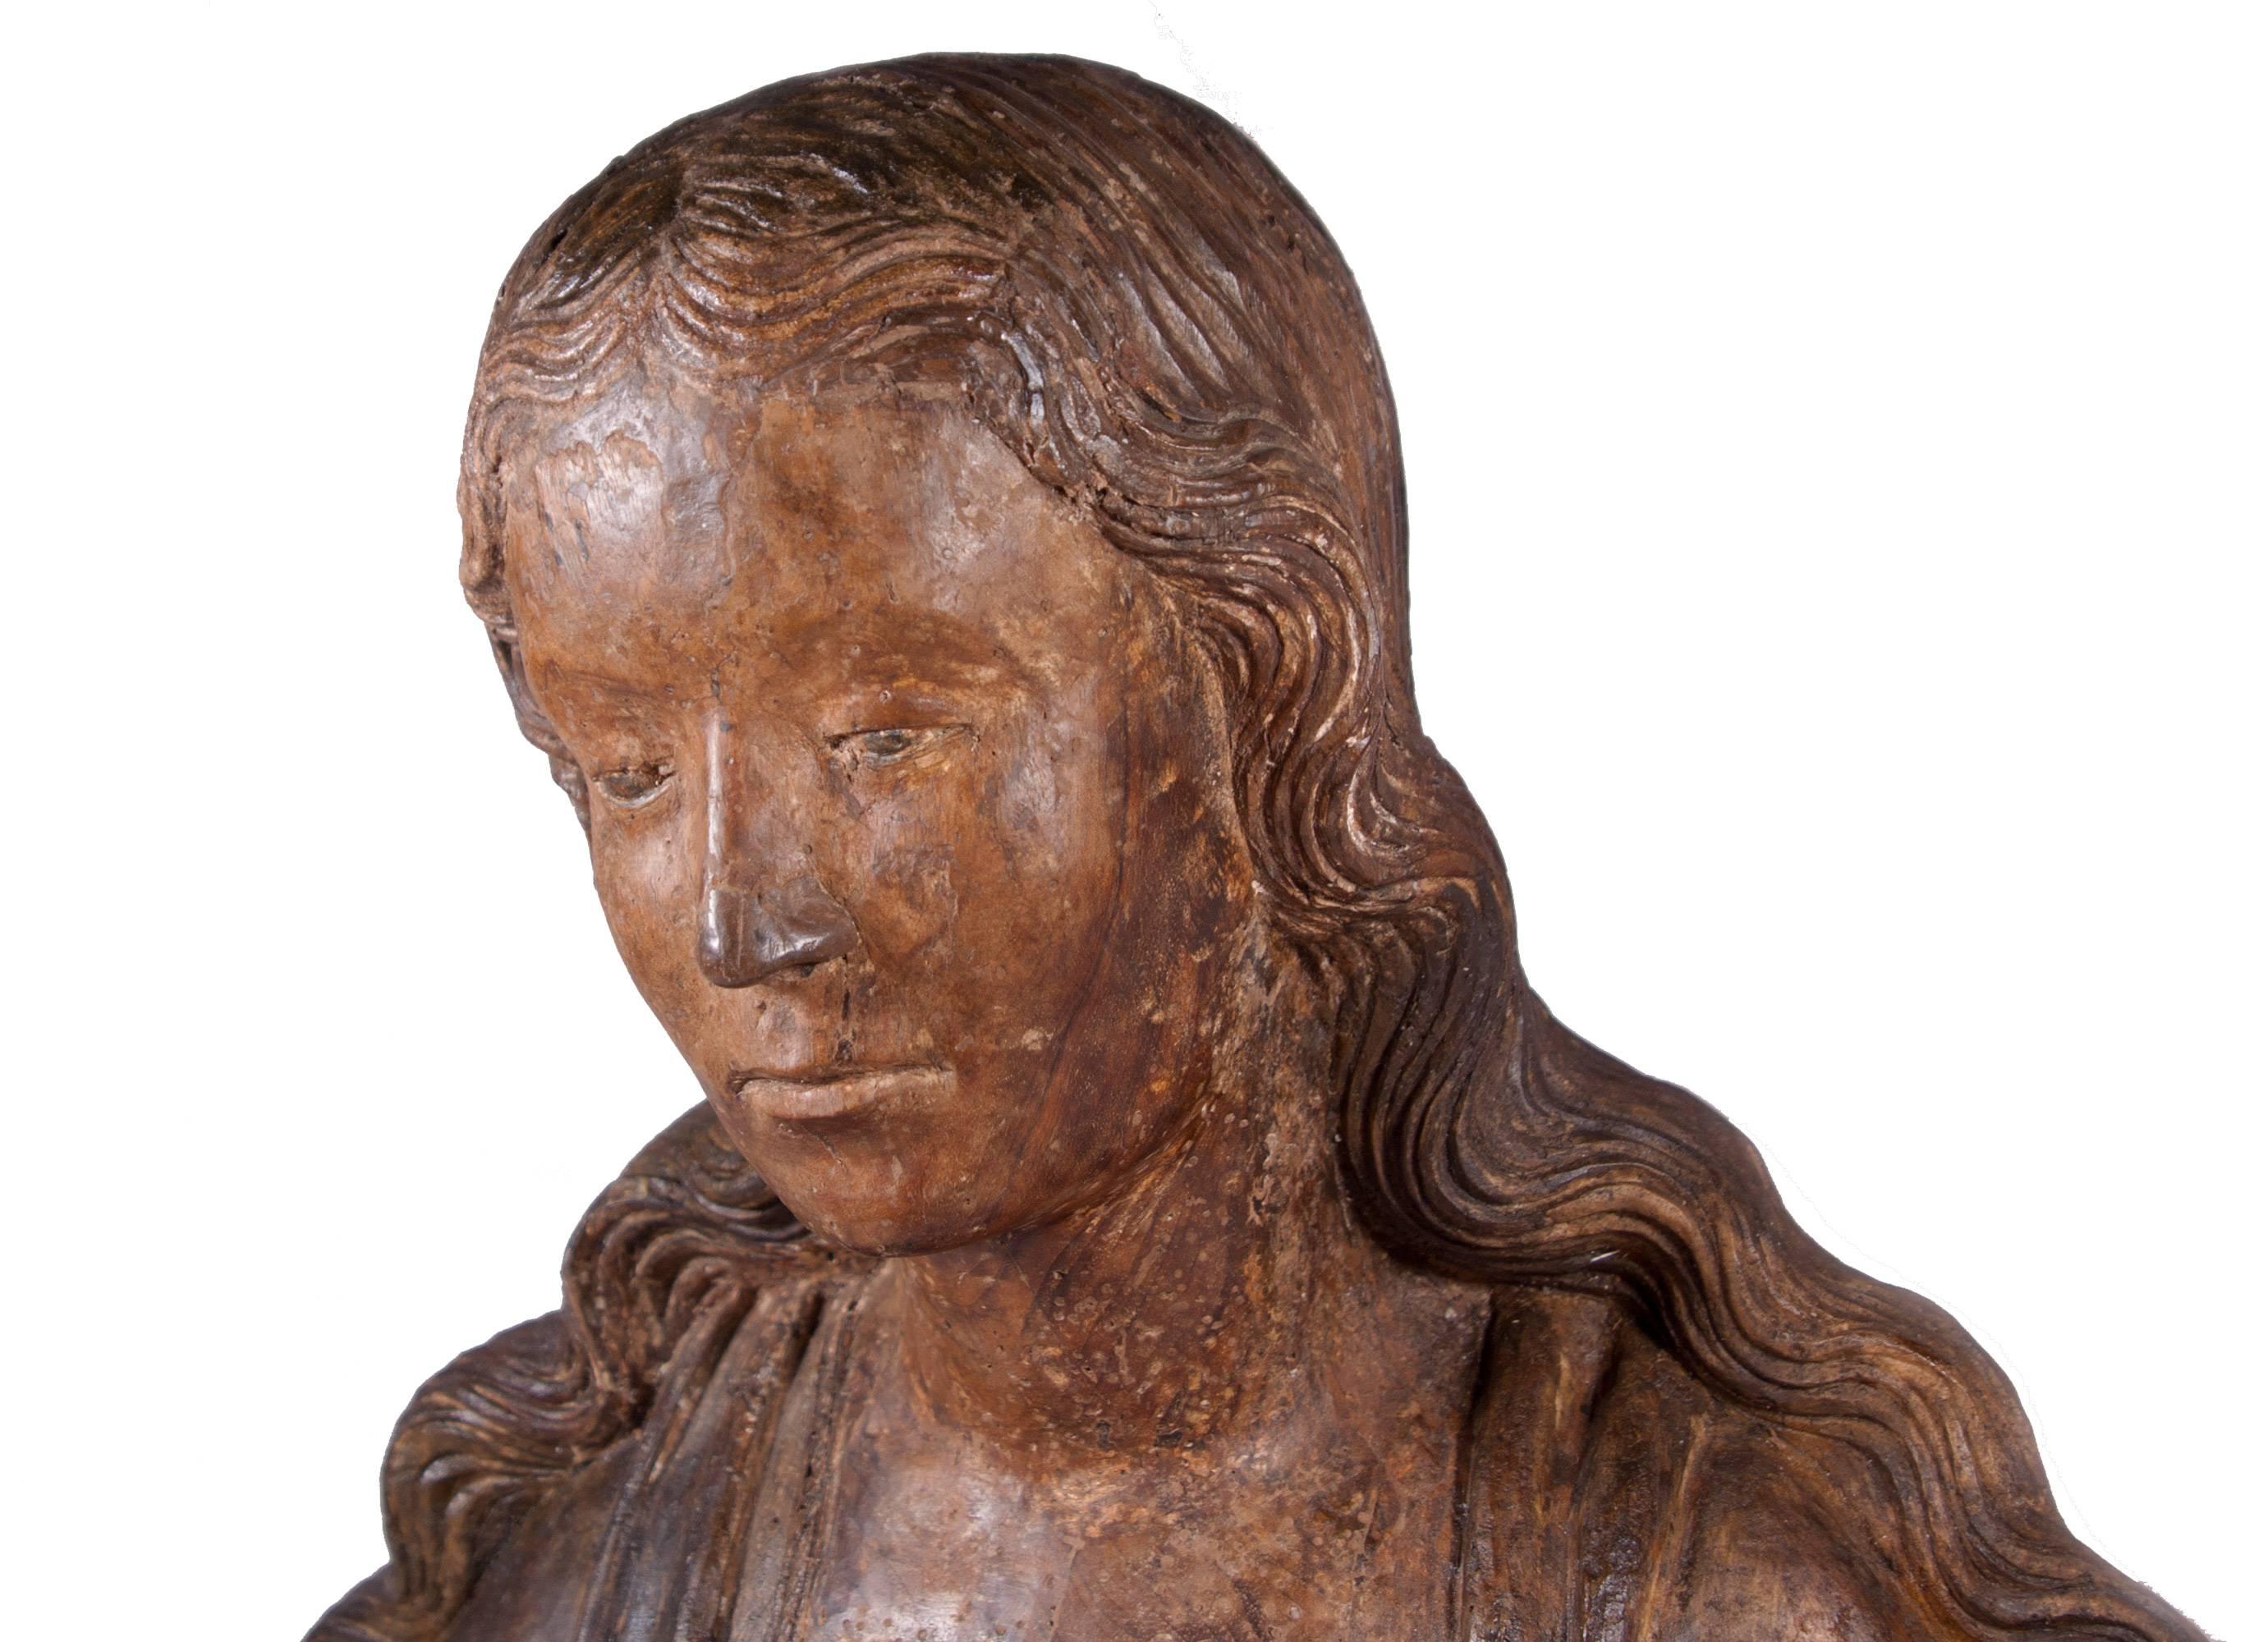 Bust of Virgin or Saint, circa 1500-1520, Northern France.  - Brown Figurative Sculpture by Unknown